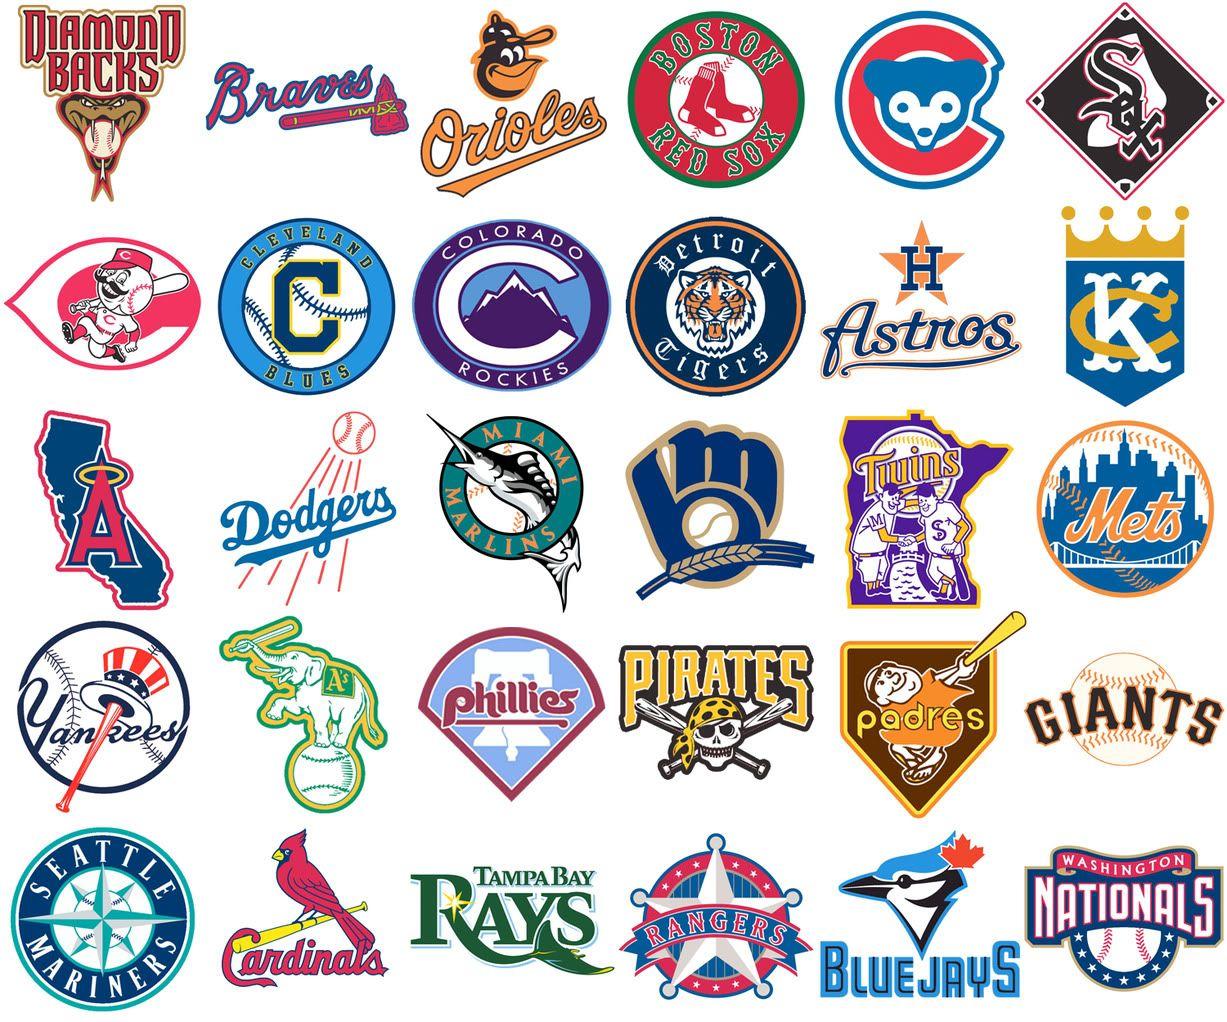 Old MLB Logo - What the MLB primary logos should be Creamer's